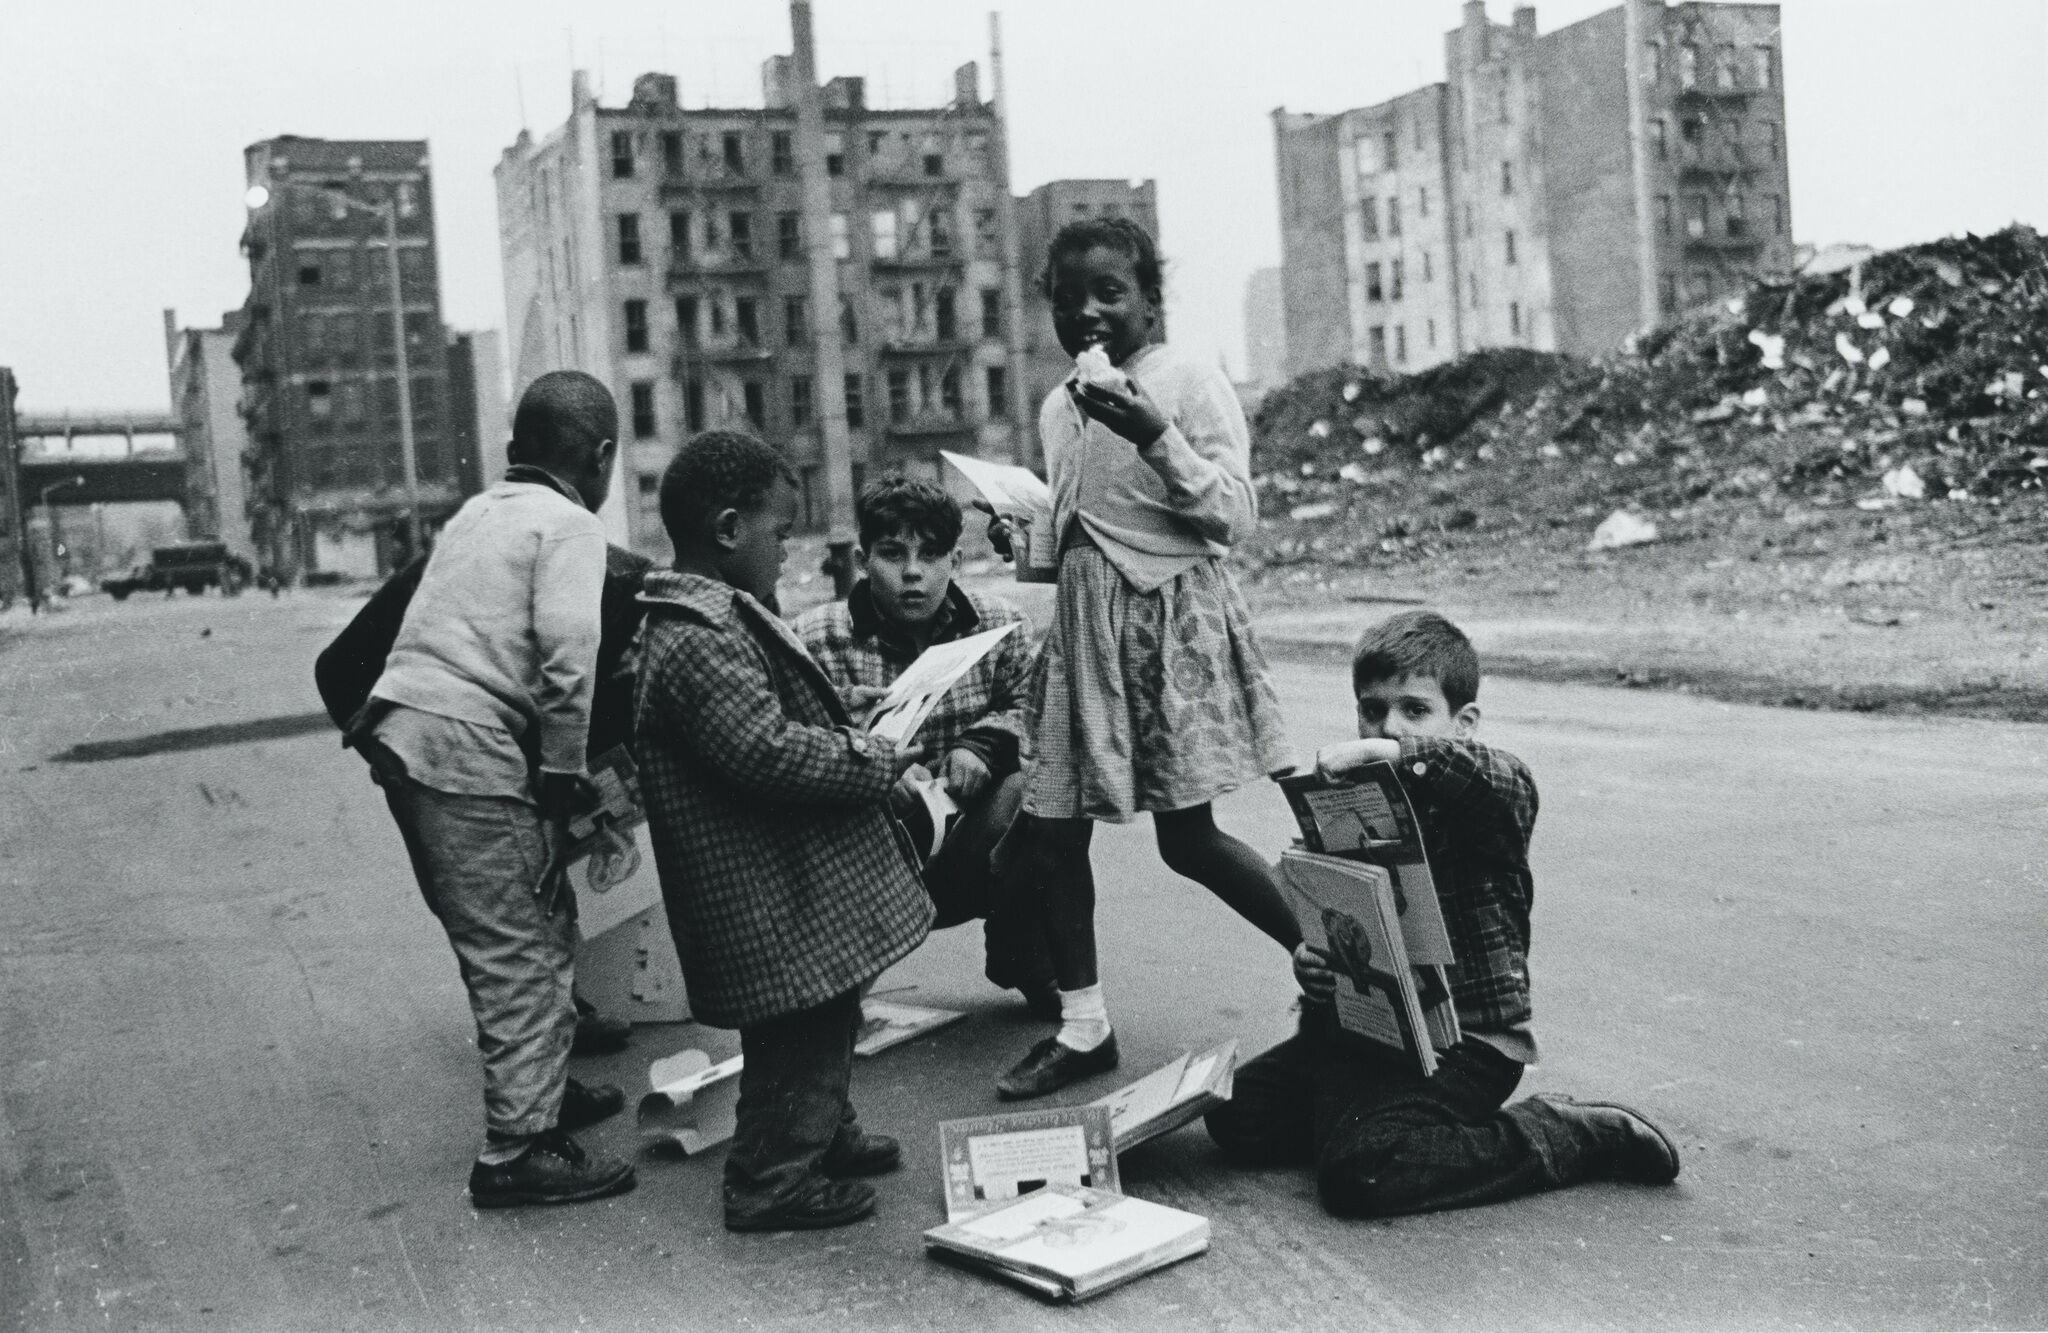 A group of children playing.